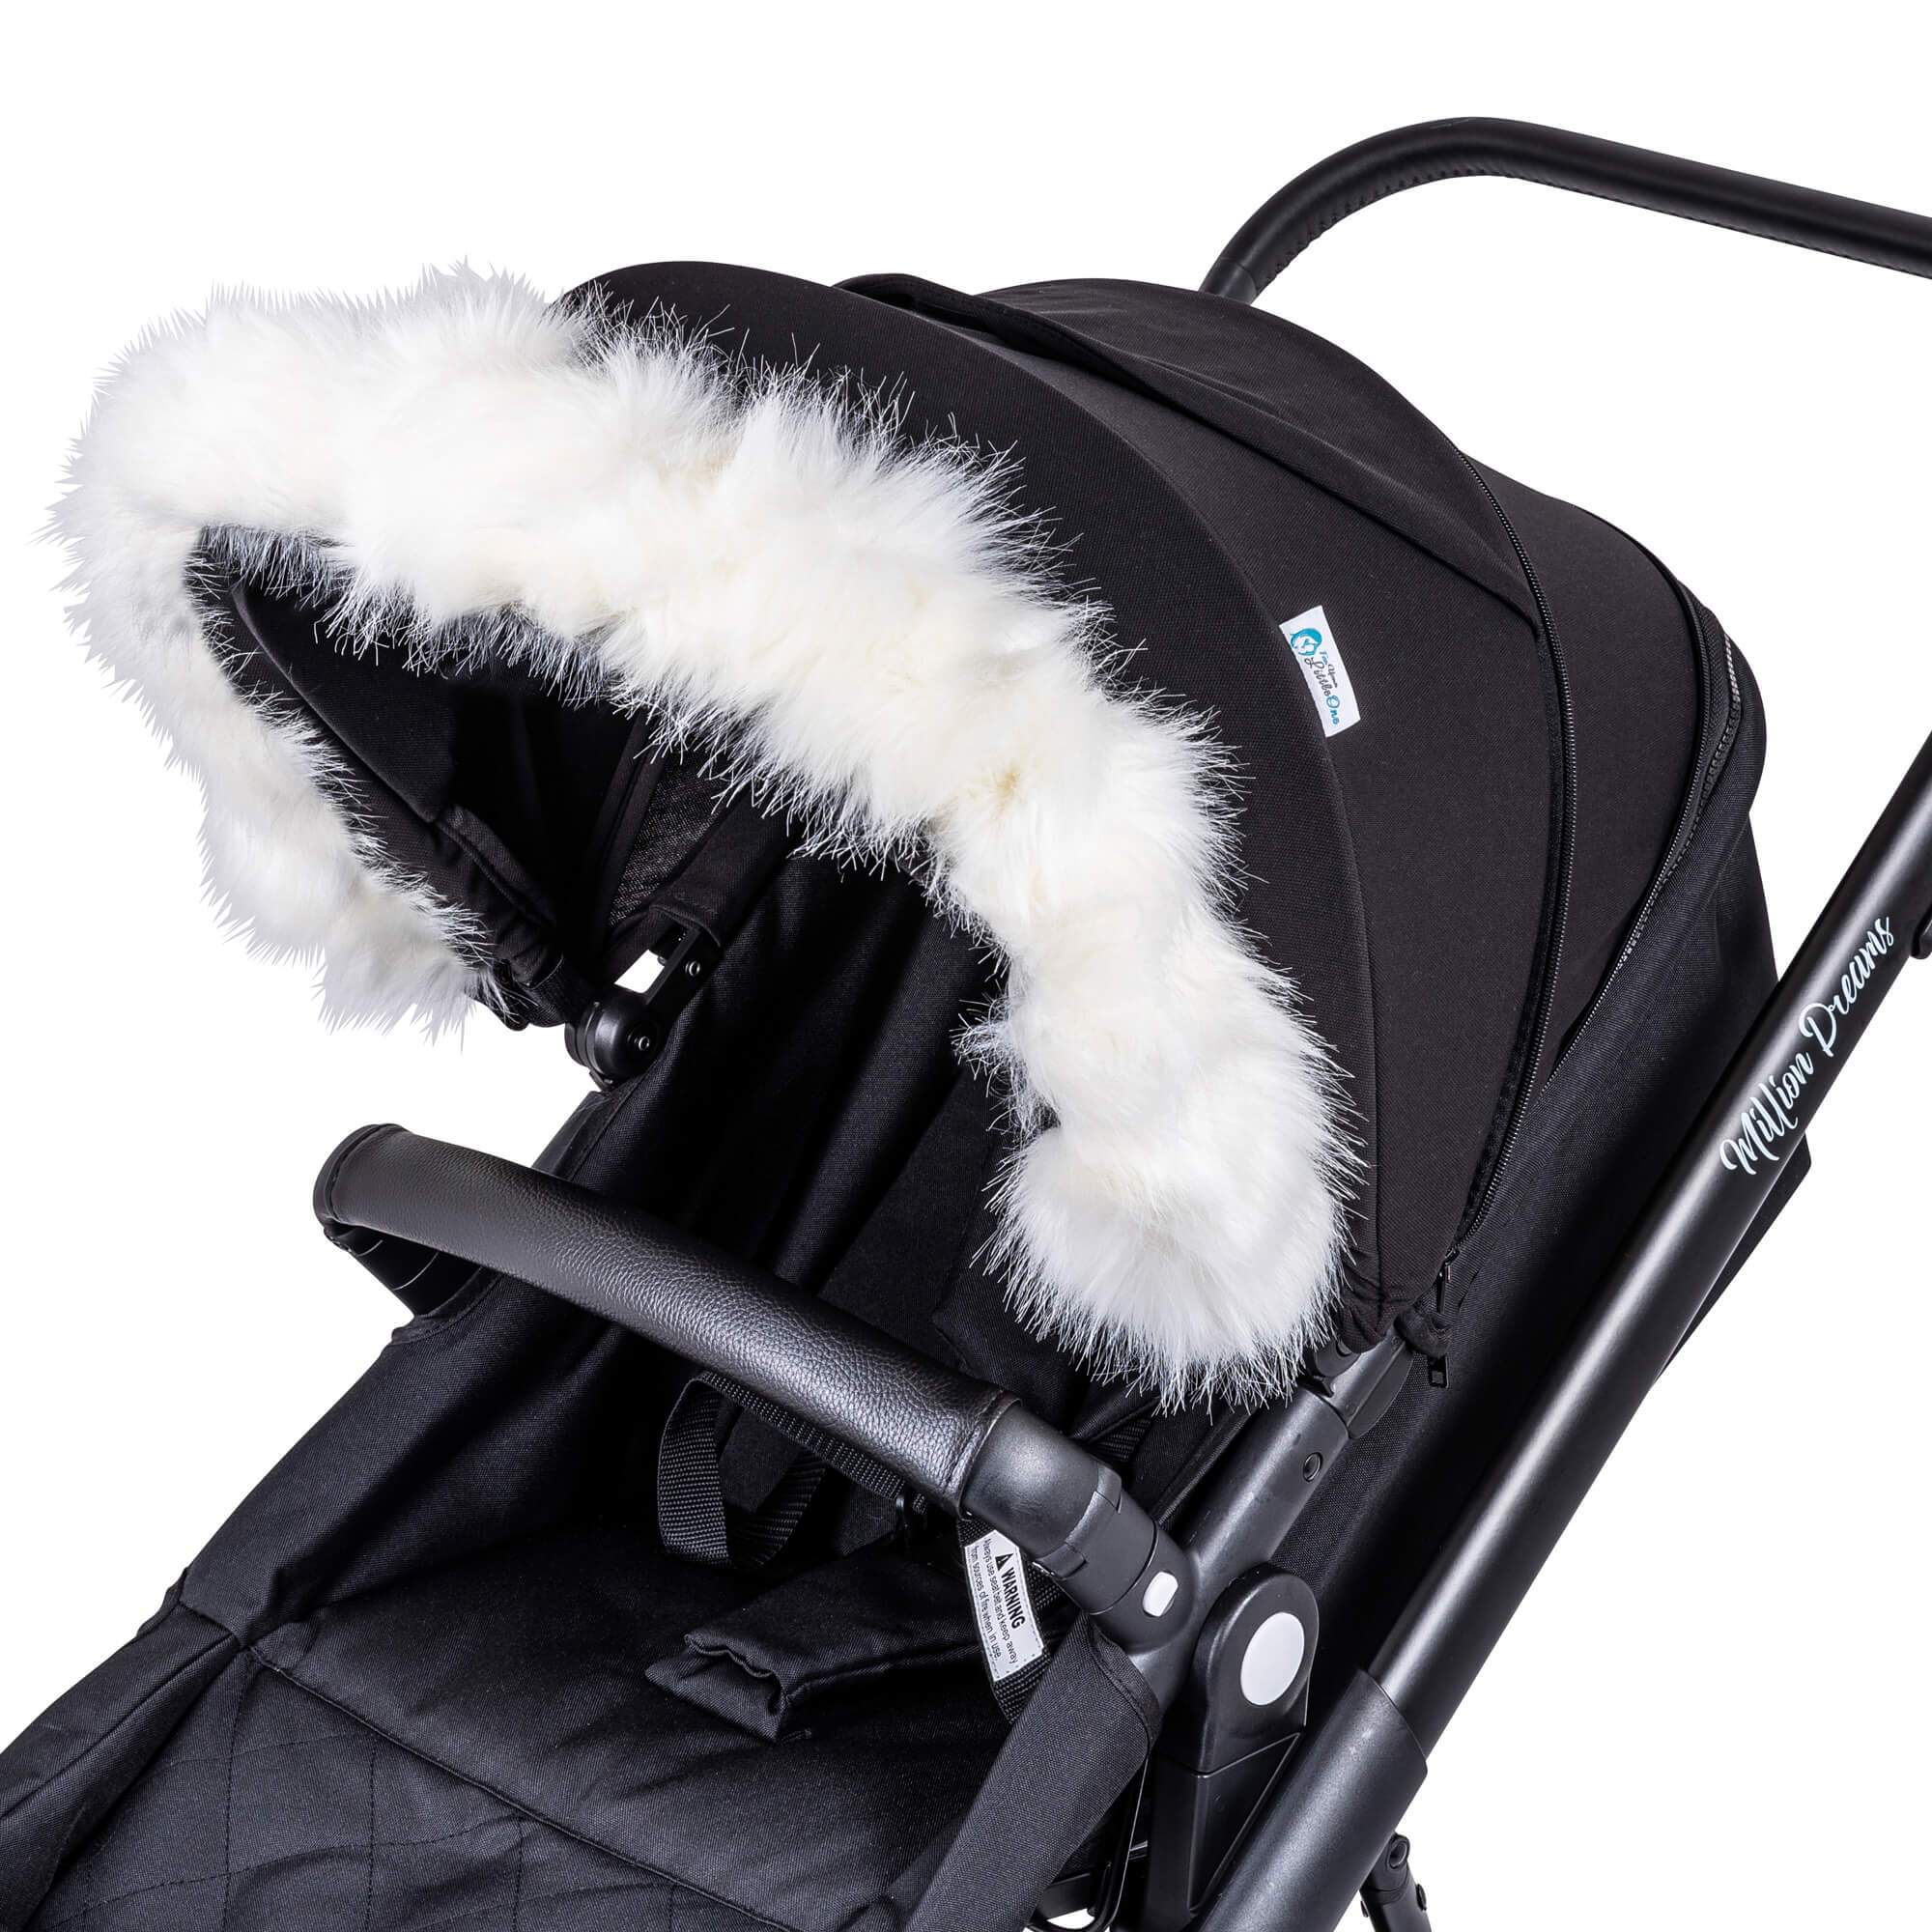 Pram Fur Hood Trim Attachment for Pushchair Compatible with Kiddicare - For Your Little One